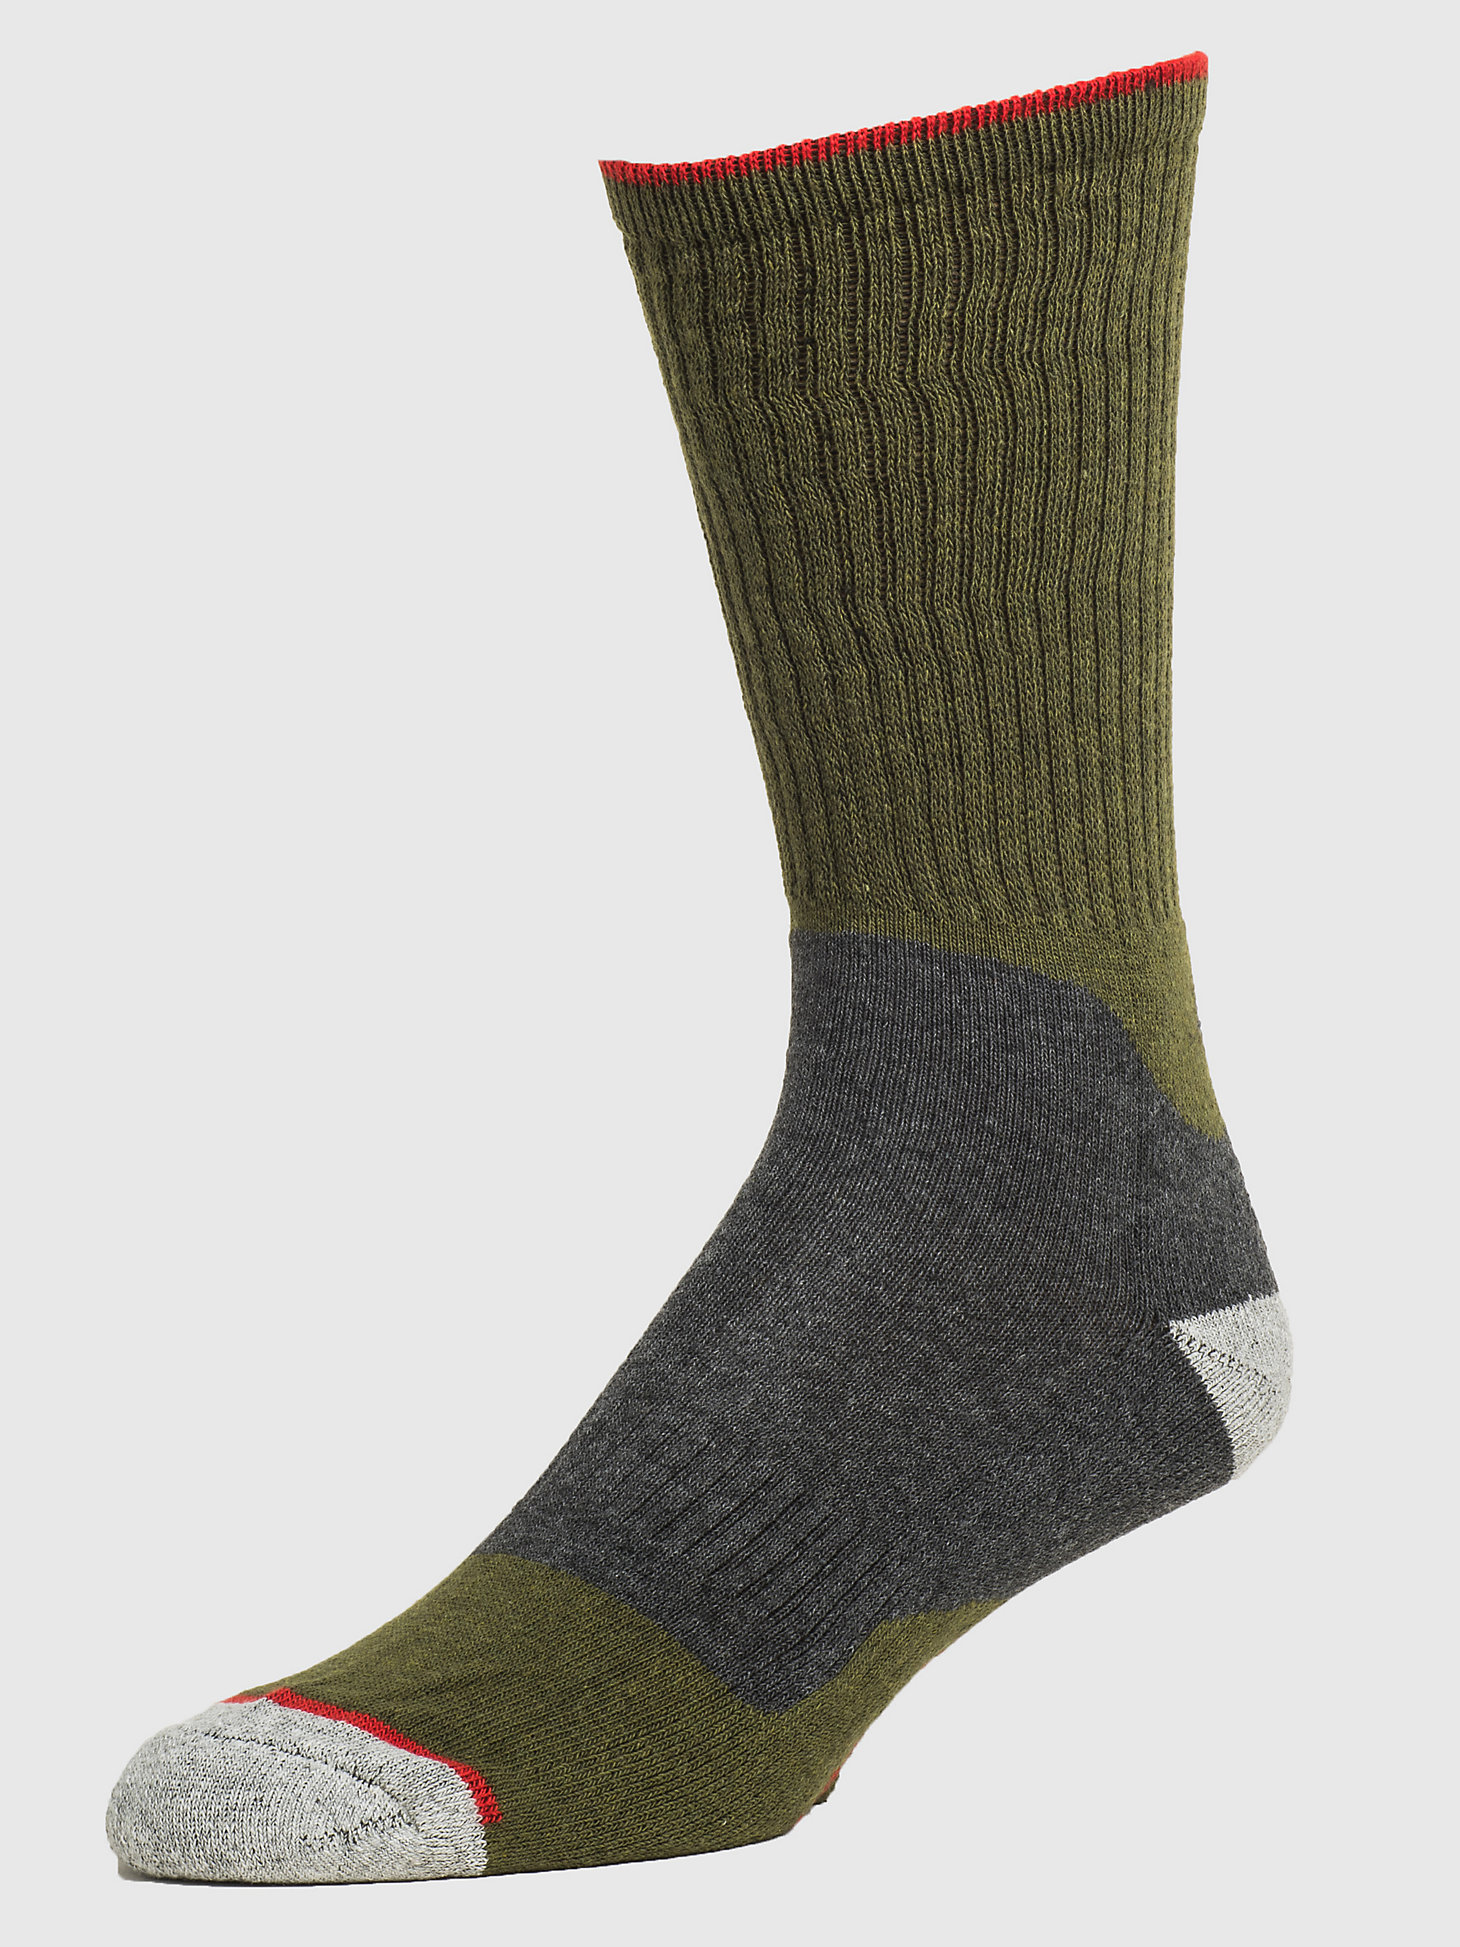 Men's Wrangler Mid-Weight Crew Work Socks (3-Pack) in Army Green alternative view 3